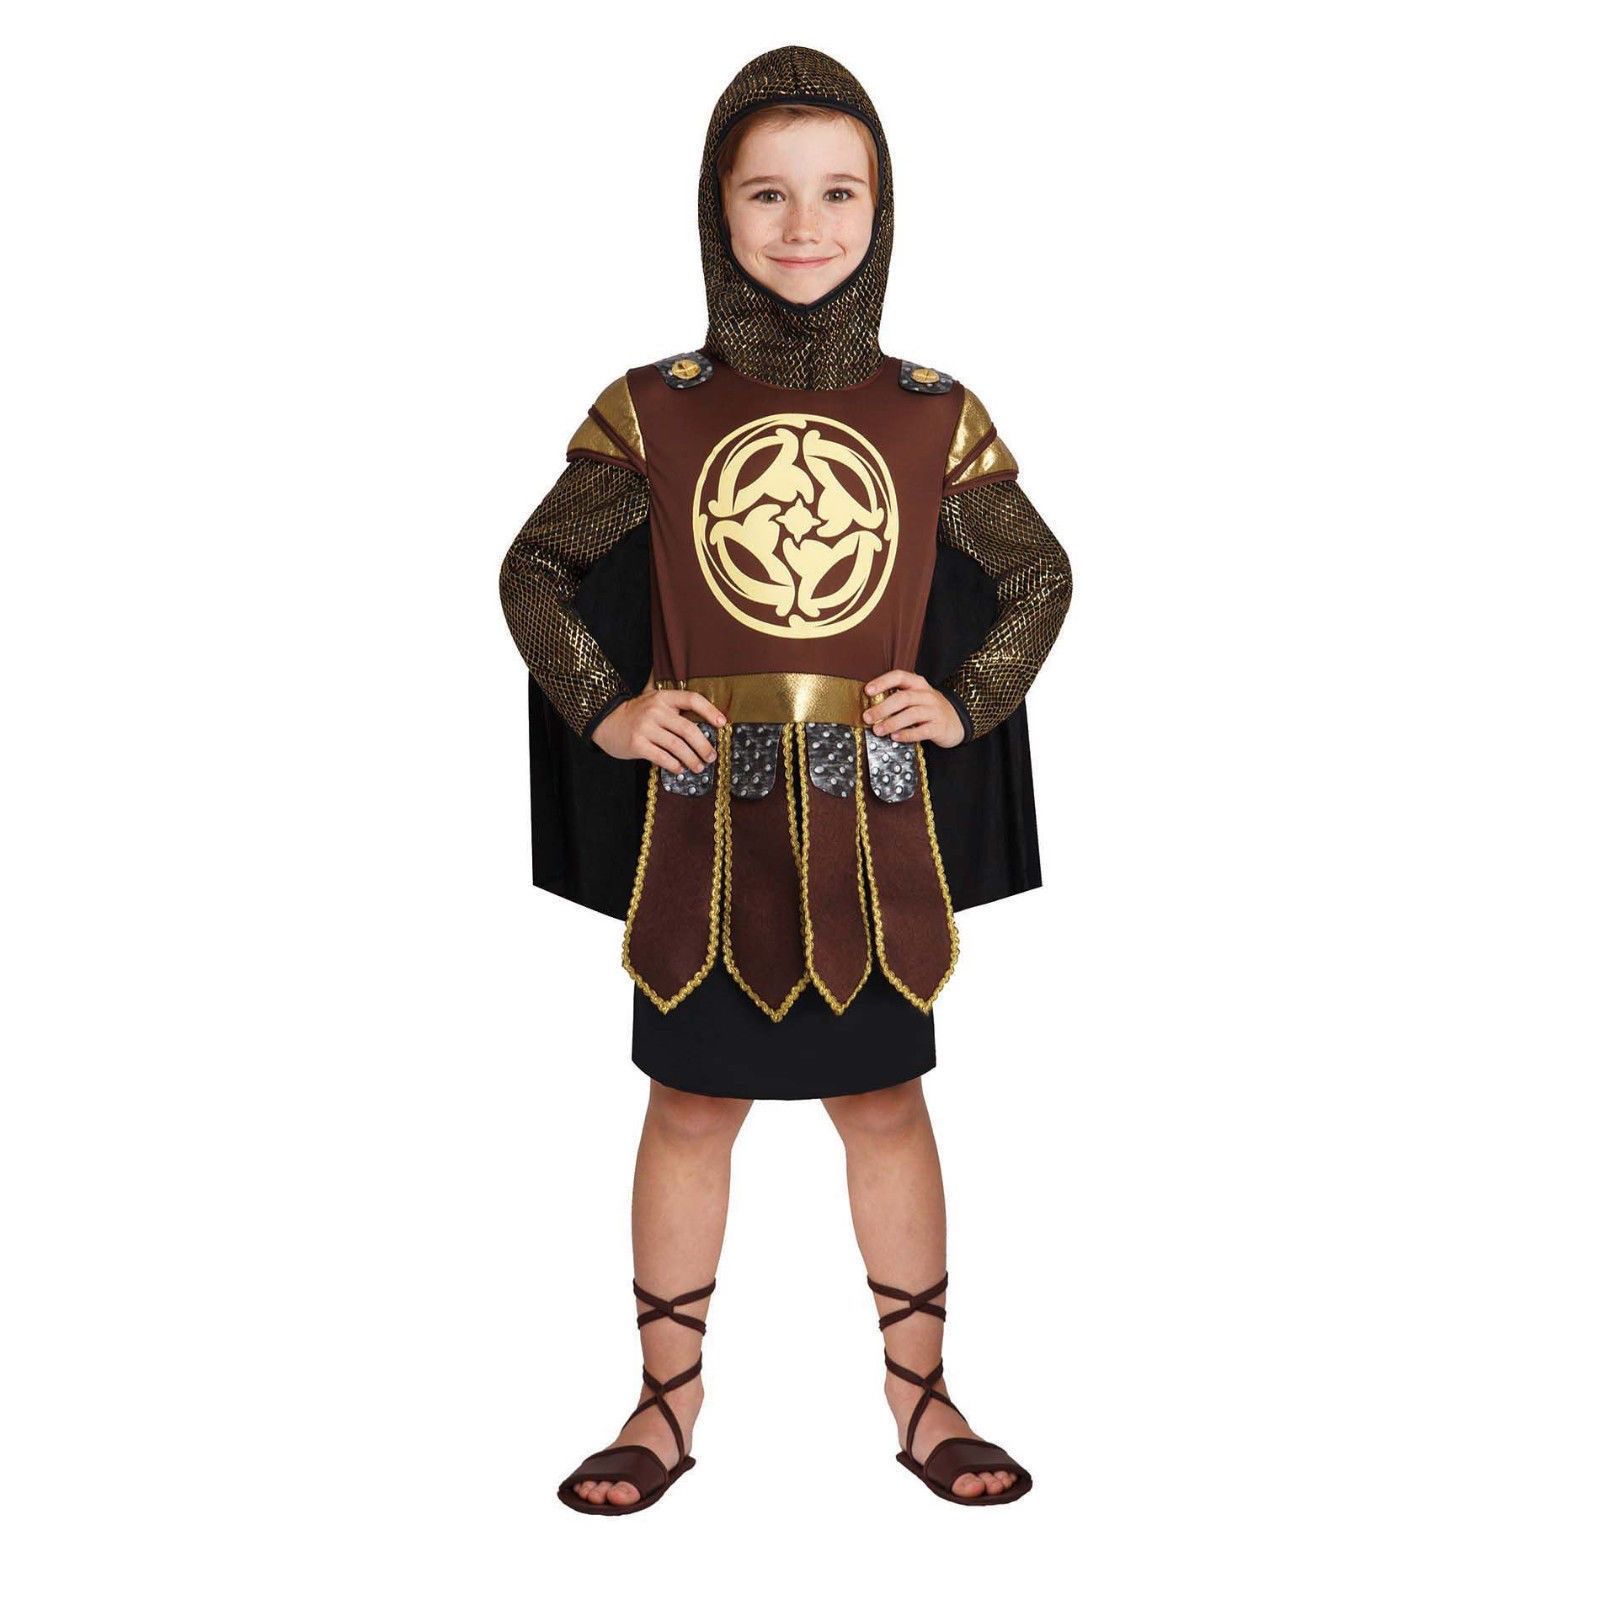 Renaissance Roman Warrior Halloween Costume Prince Dress up Small - new with tag